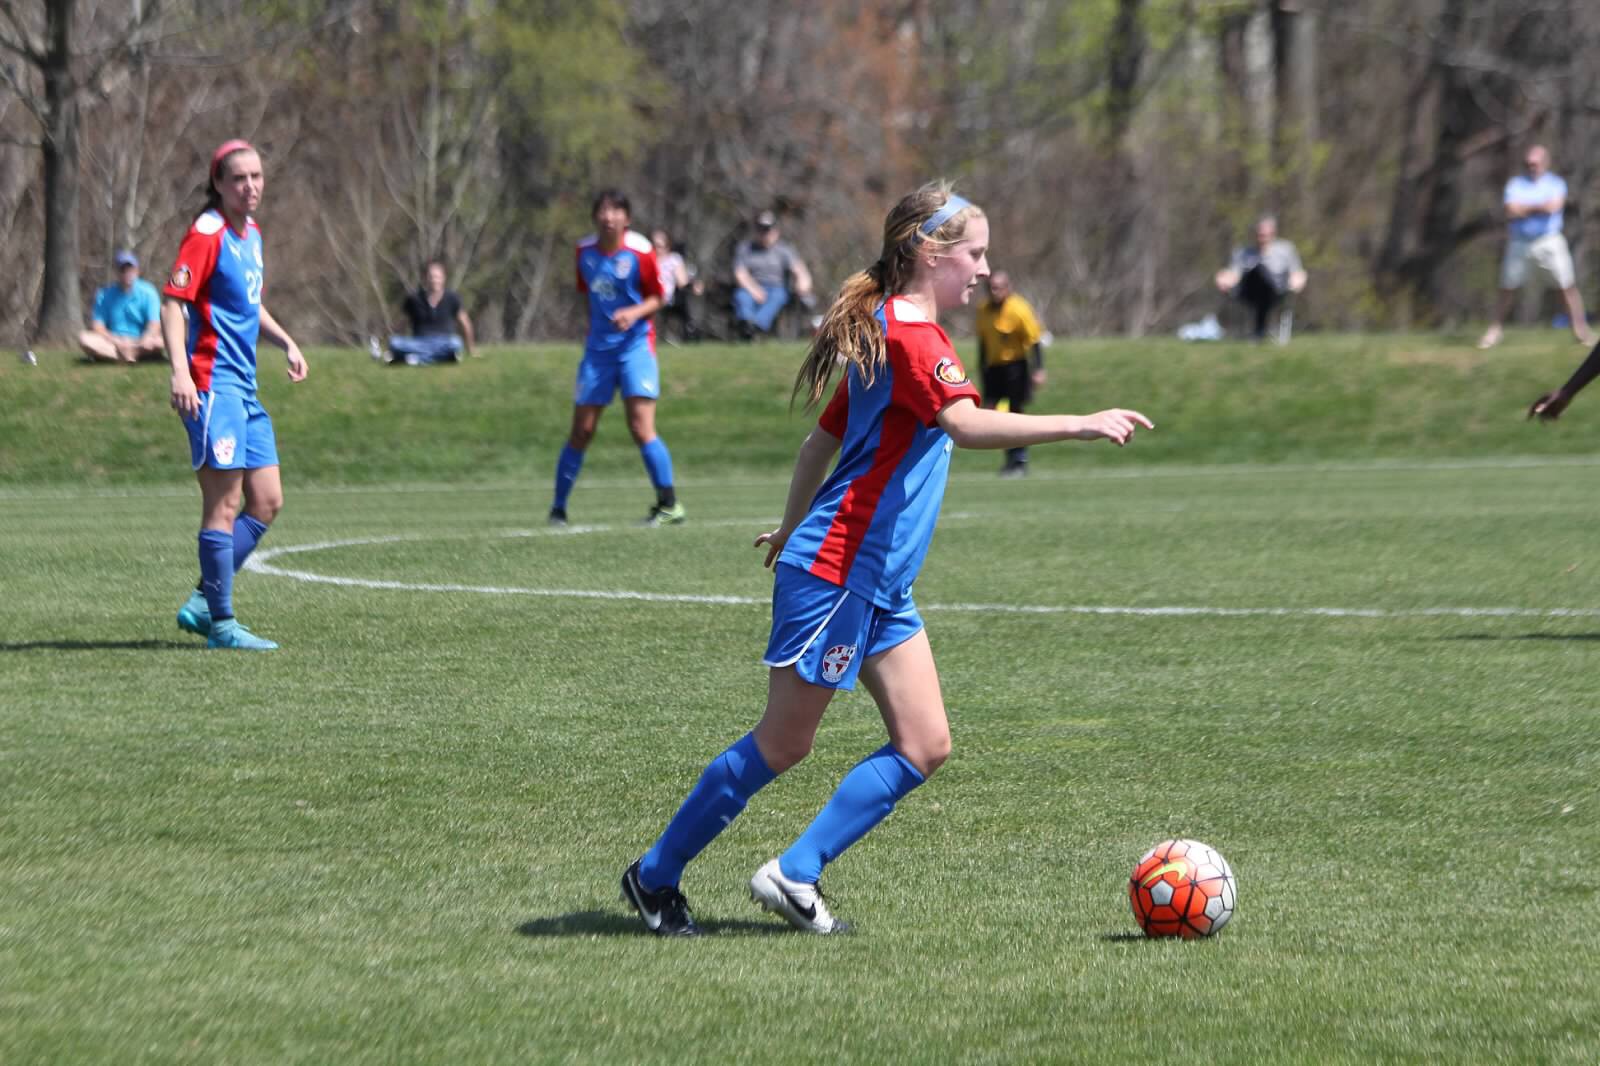 Youth Soccer News: Three Internationals SC Players Called Up for U.S. U18 Women’s National Team Training Camp